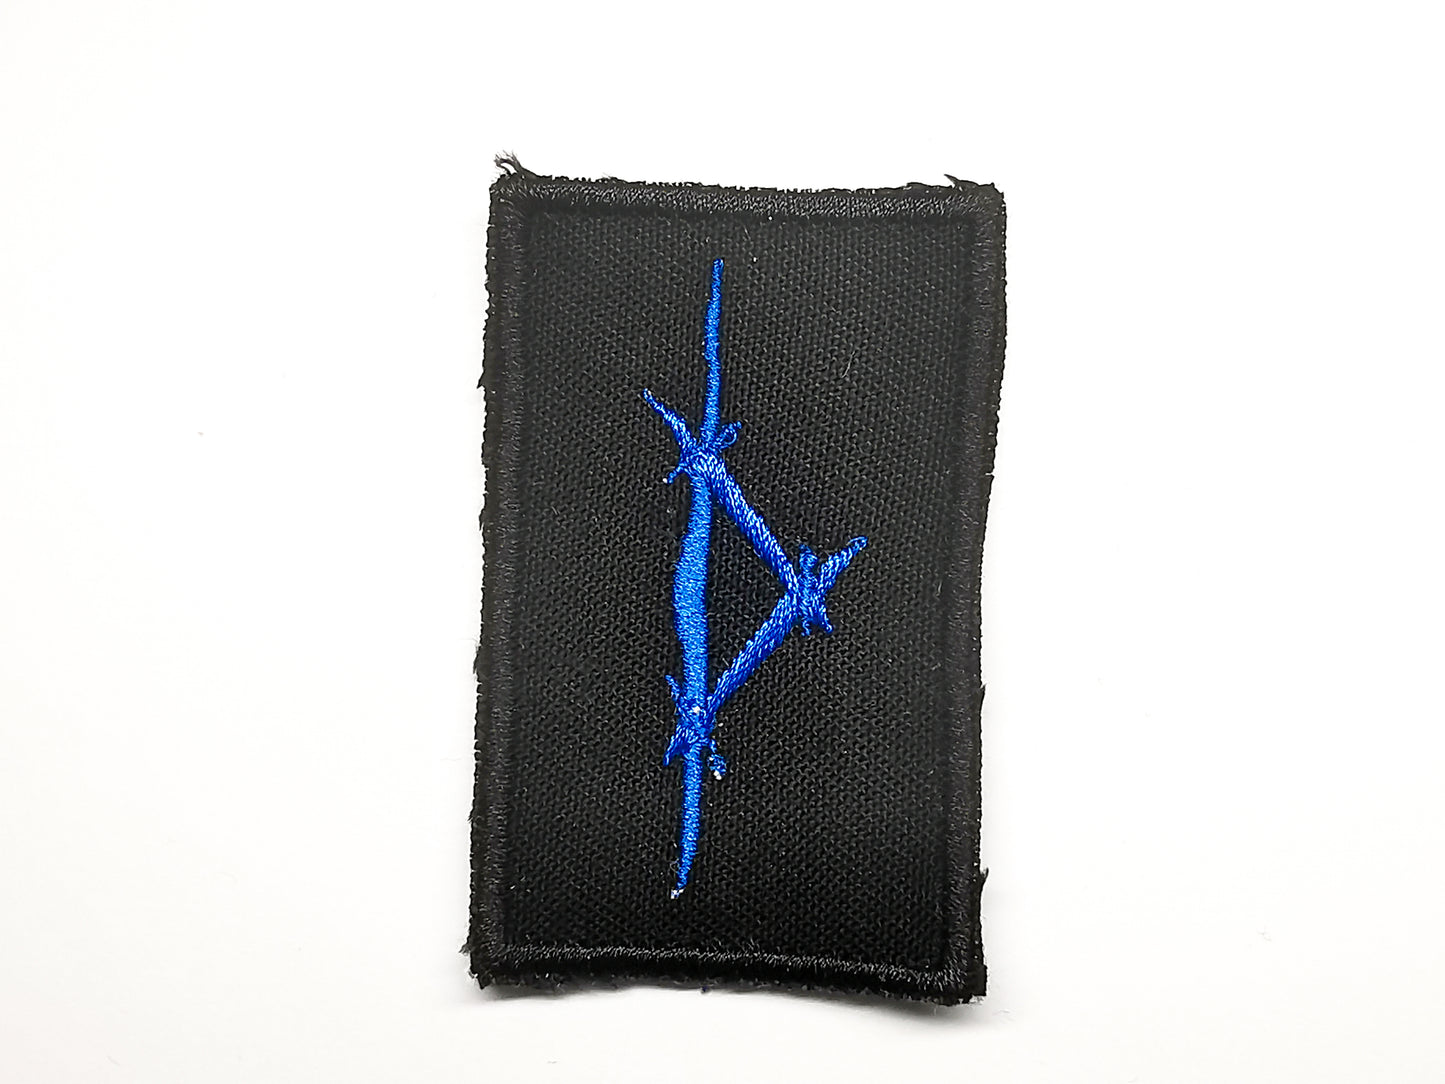 X Rune Rustic Embroidered Patch Electric Blue